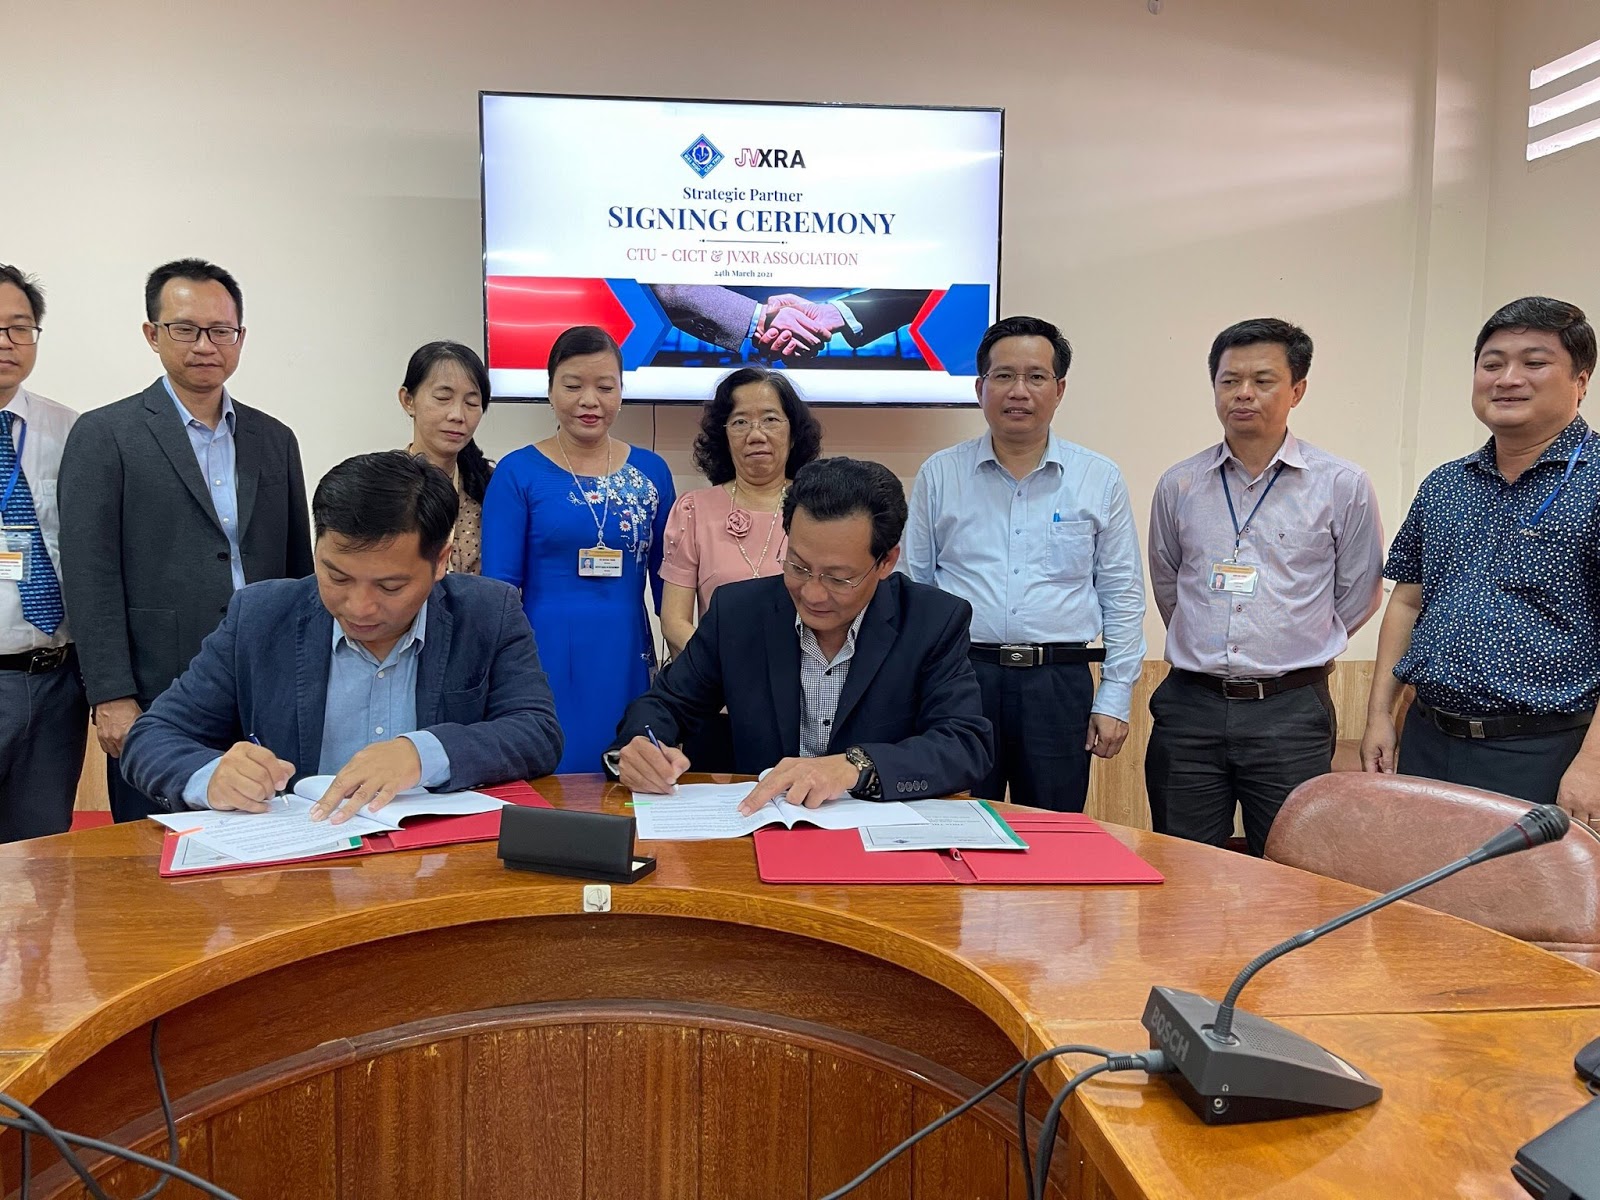 Member of the Board of Directors of GIANTY VN (JVXRA Co-founder) signed a strategic partnership, continuing the MOU agreement in January 2021 with the Faculty of Information Technology &amp; Communications, Can Tho University